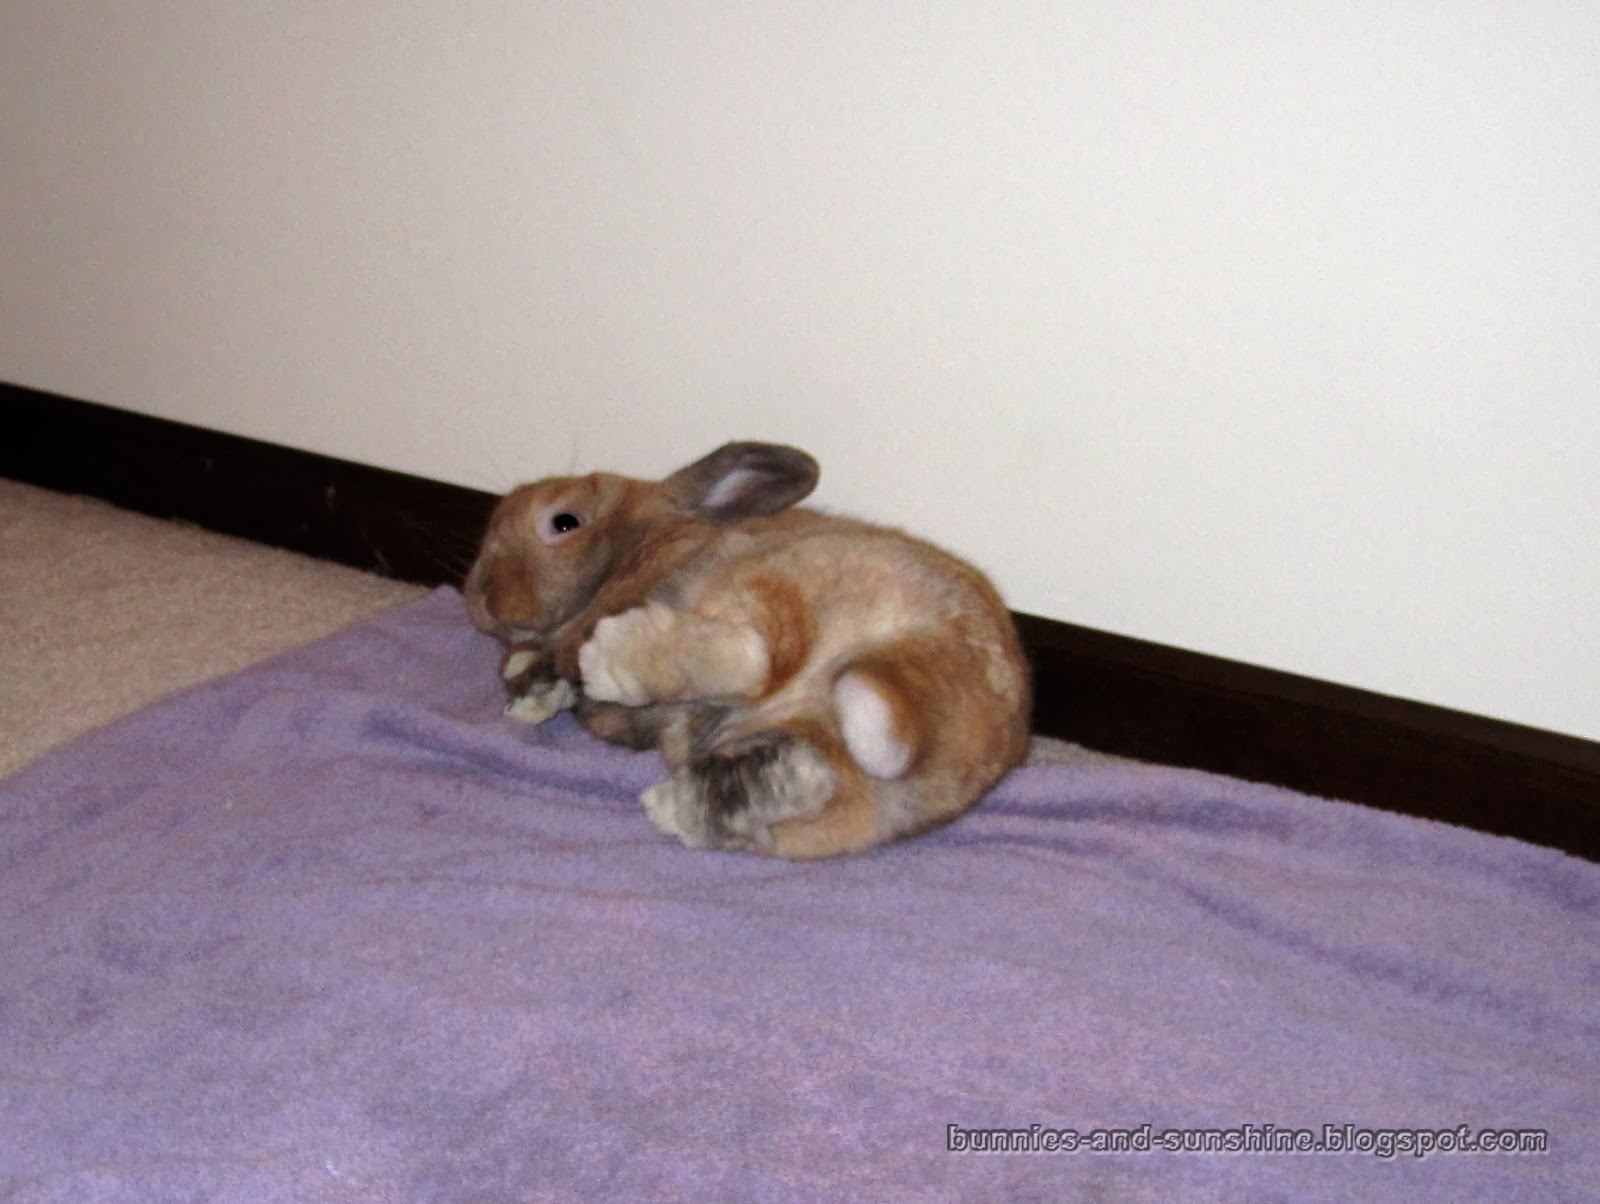 Bunnies and Sunshine: The rules of flopping.